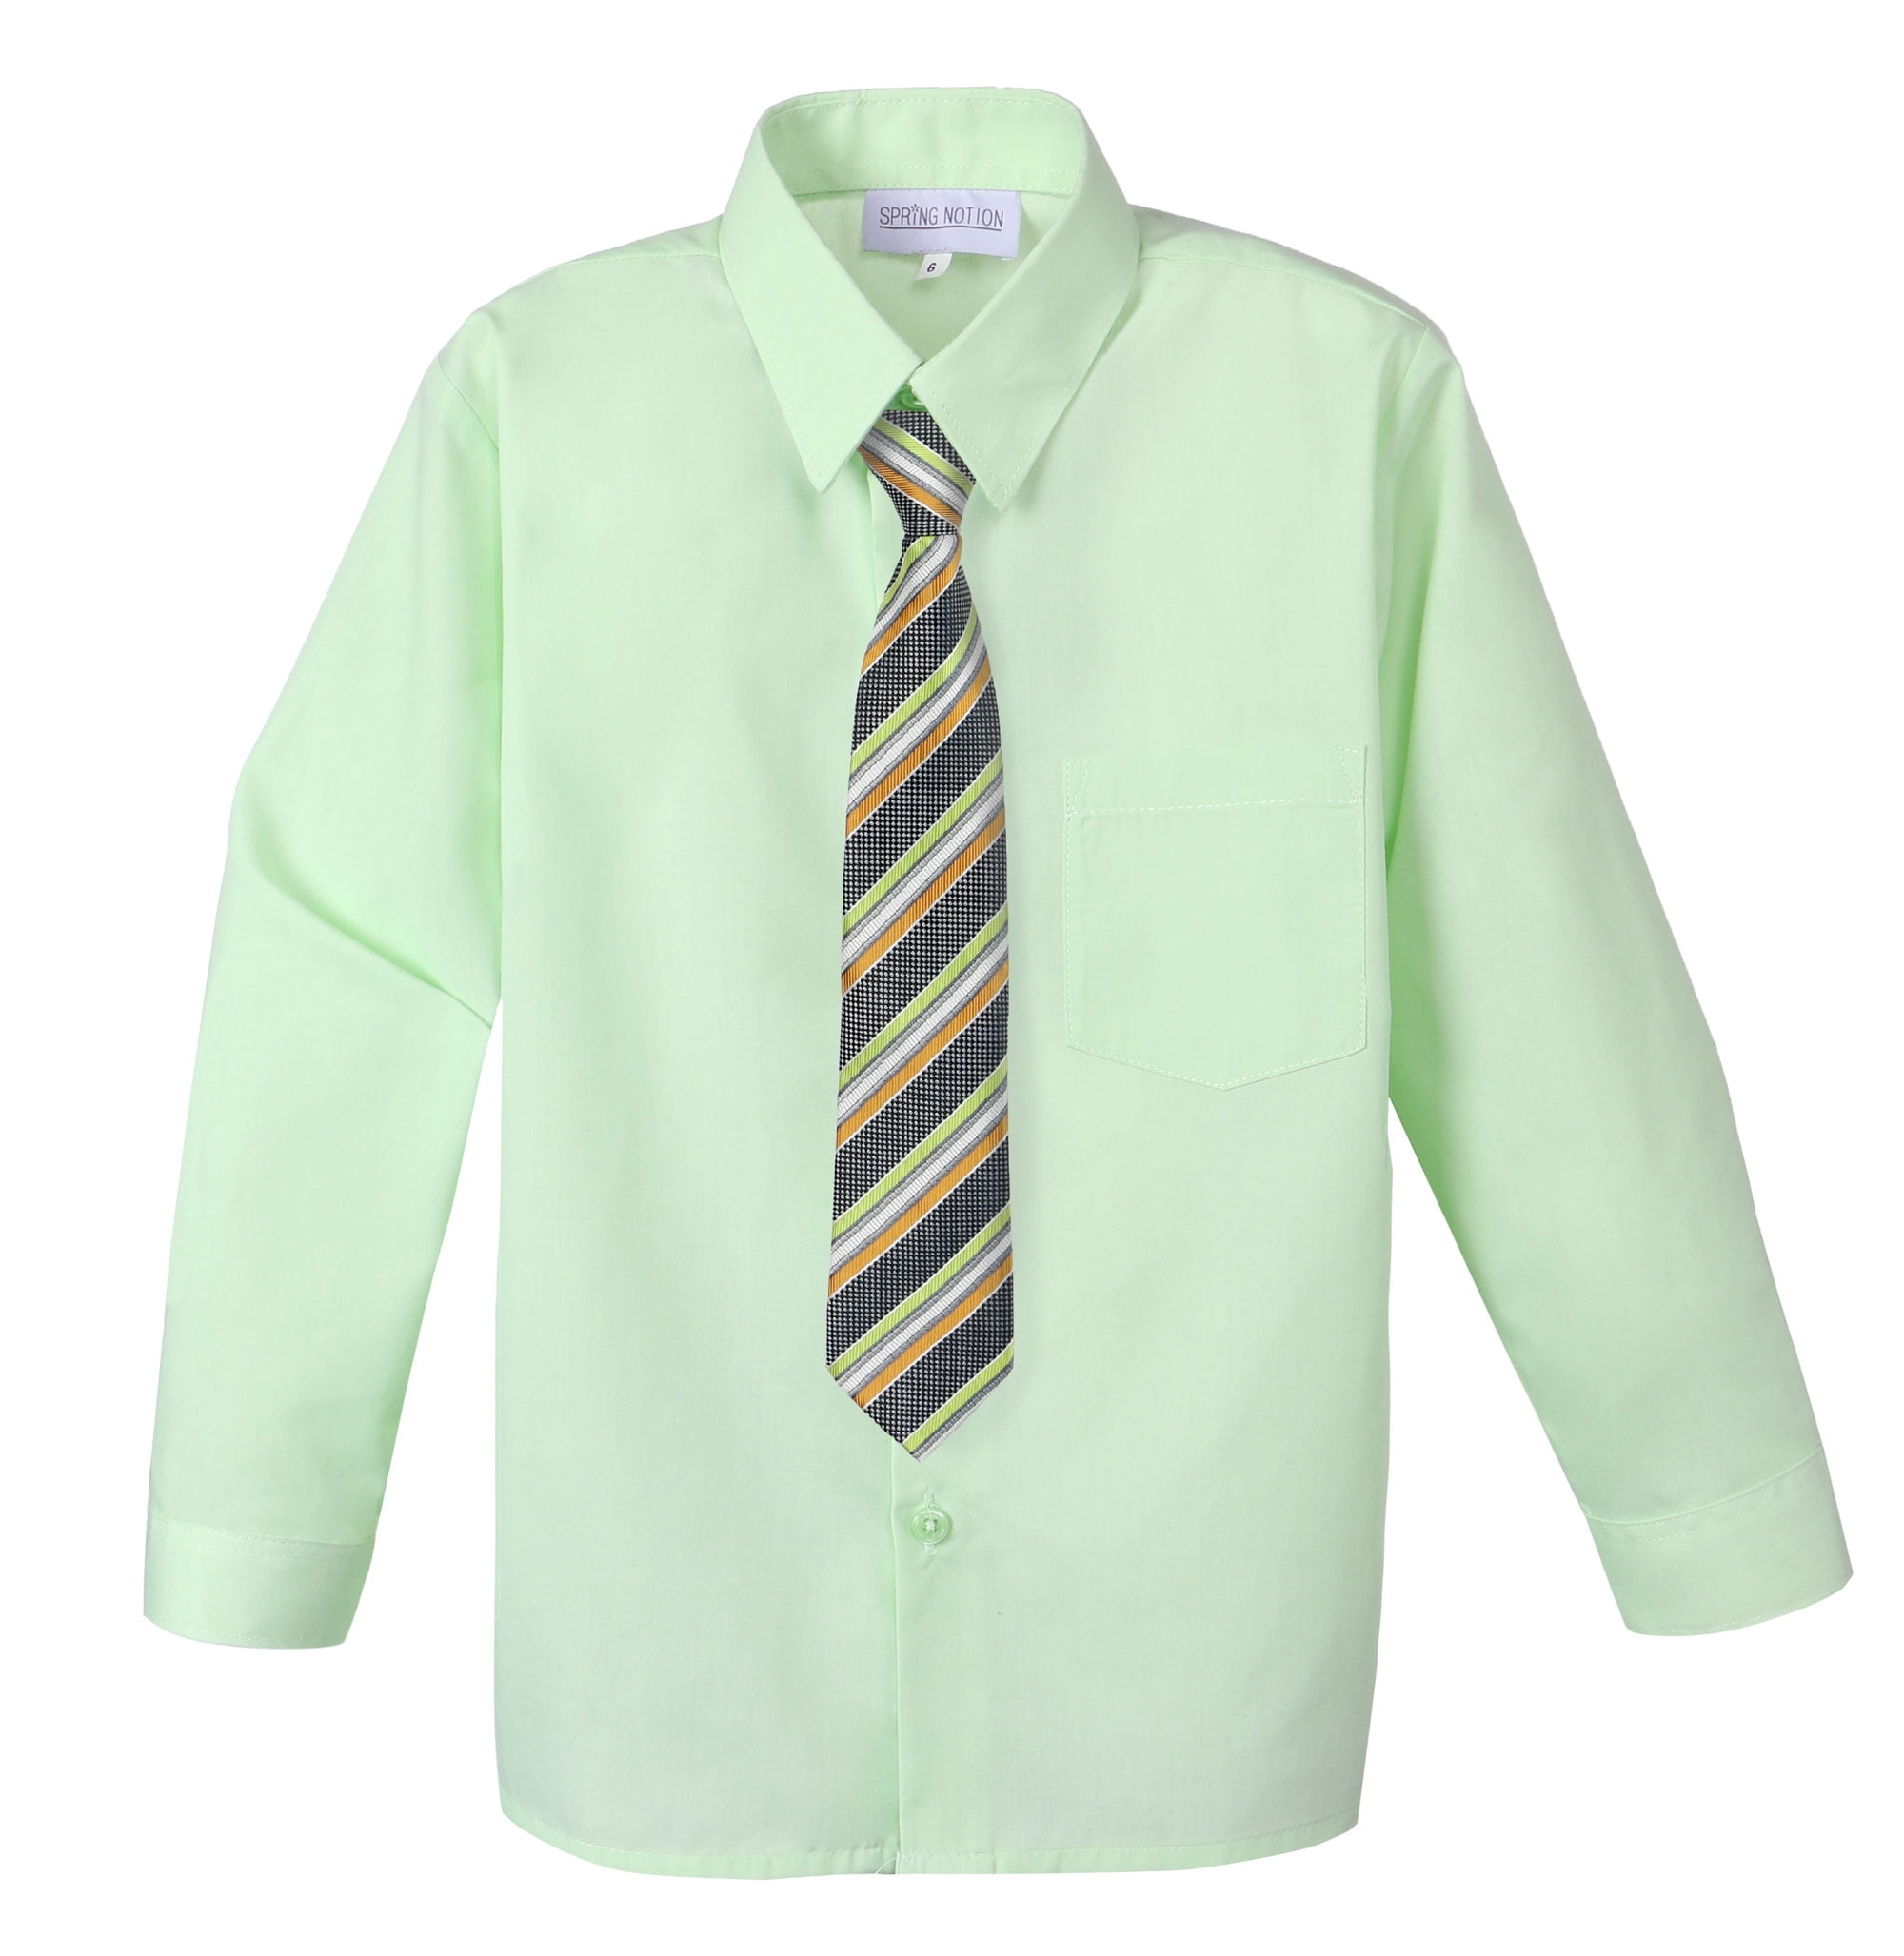 Spring Notion Baby Boys Dress Shirt with Tie and Handkerchief Set